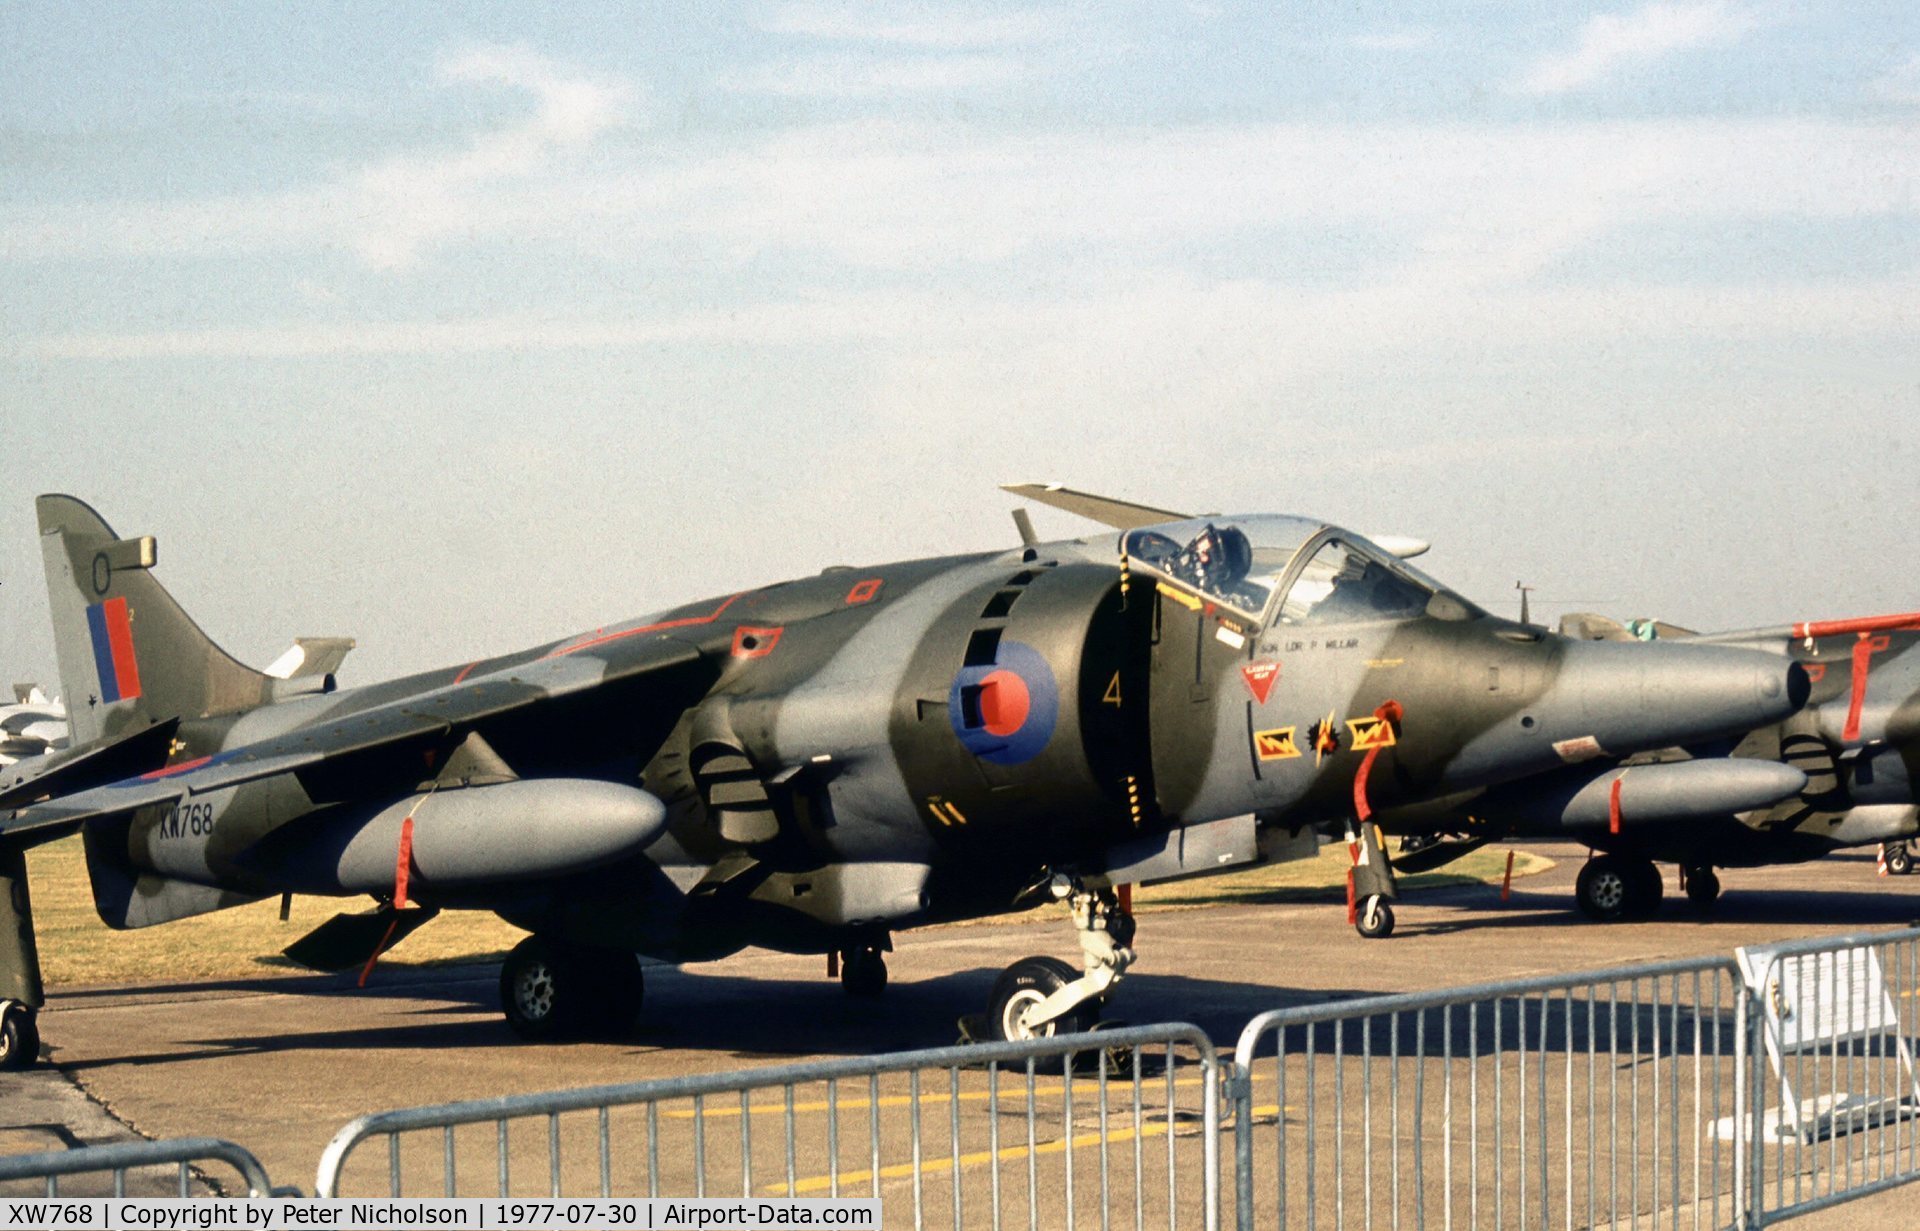 XW768, 1971 Hawker Siddeley Harrier GR.3 C/N 712085, Harrier GR.3 of 4 Squadron on display at the 1977 Royal Review at RAF Finningley.